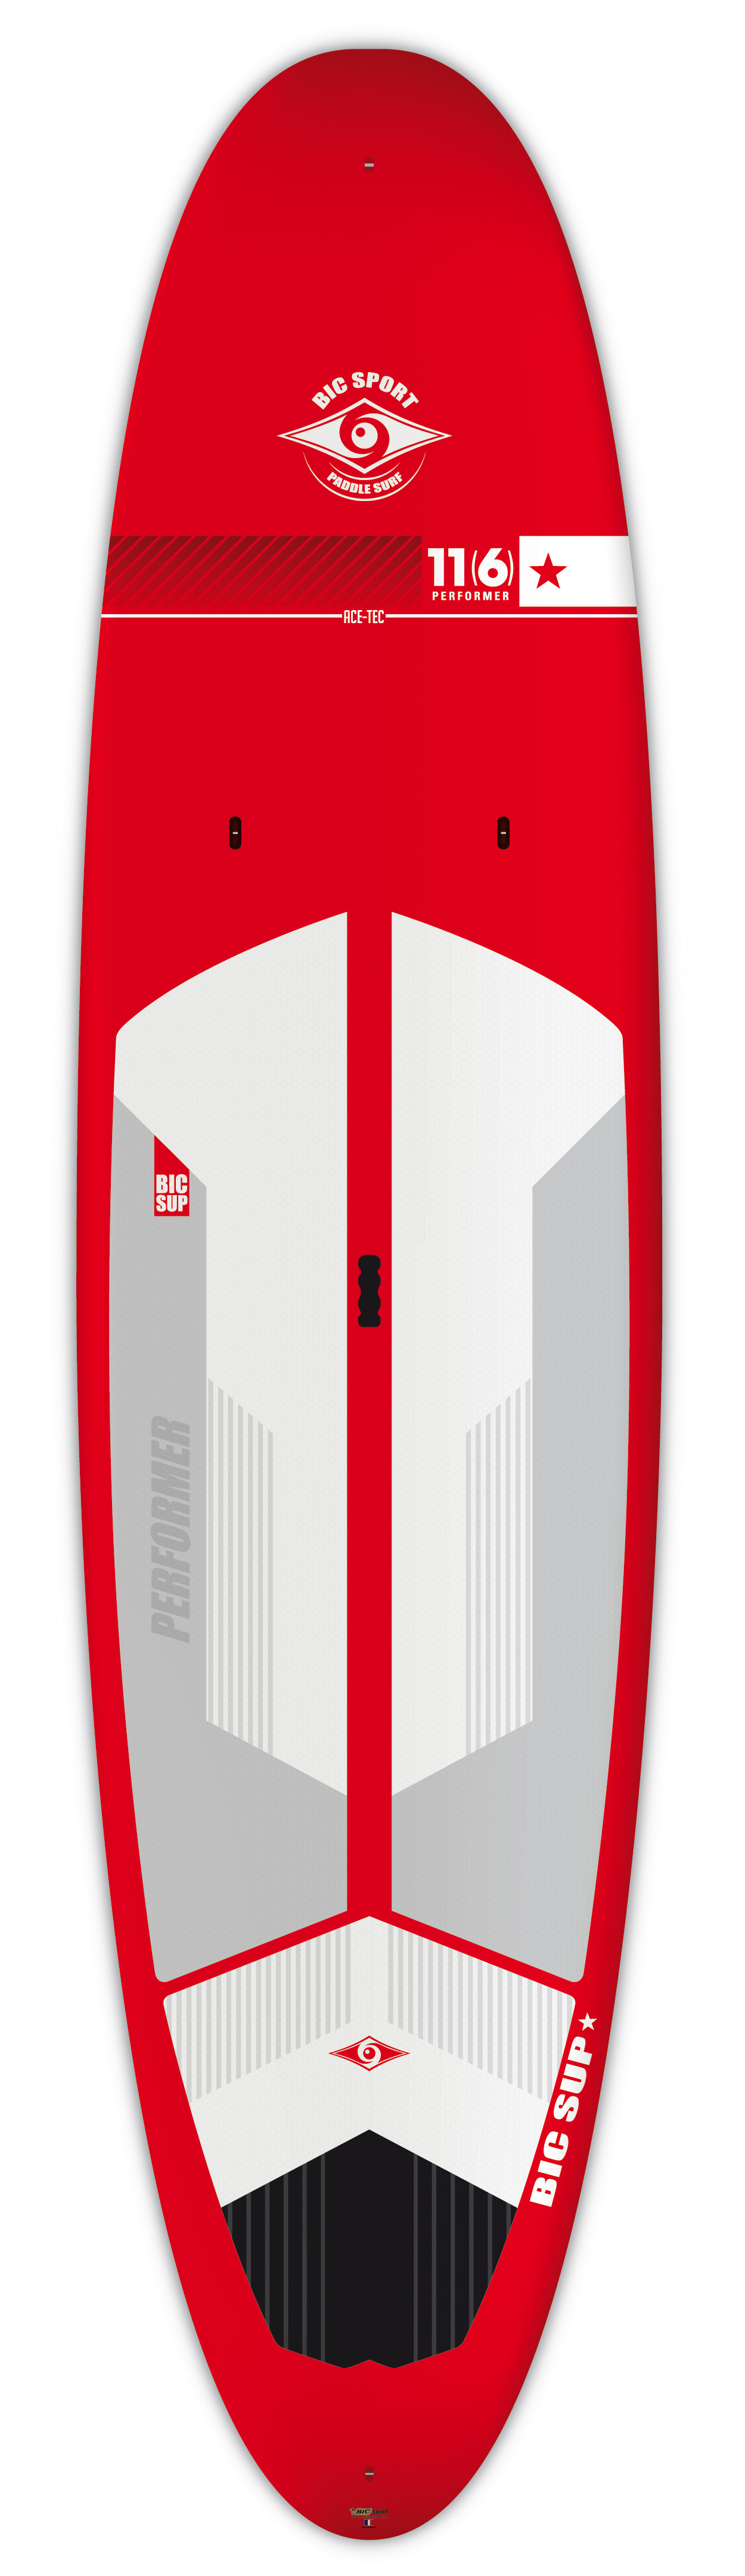 Paddleboards: ACE-TEC 11'6" Performer Red by BIC SUP - Image 4500